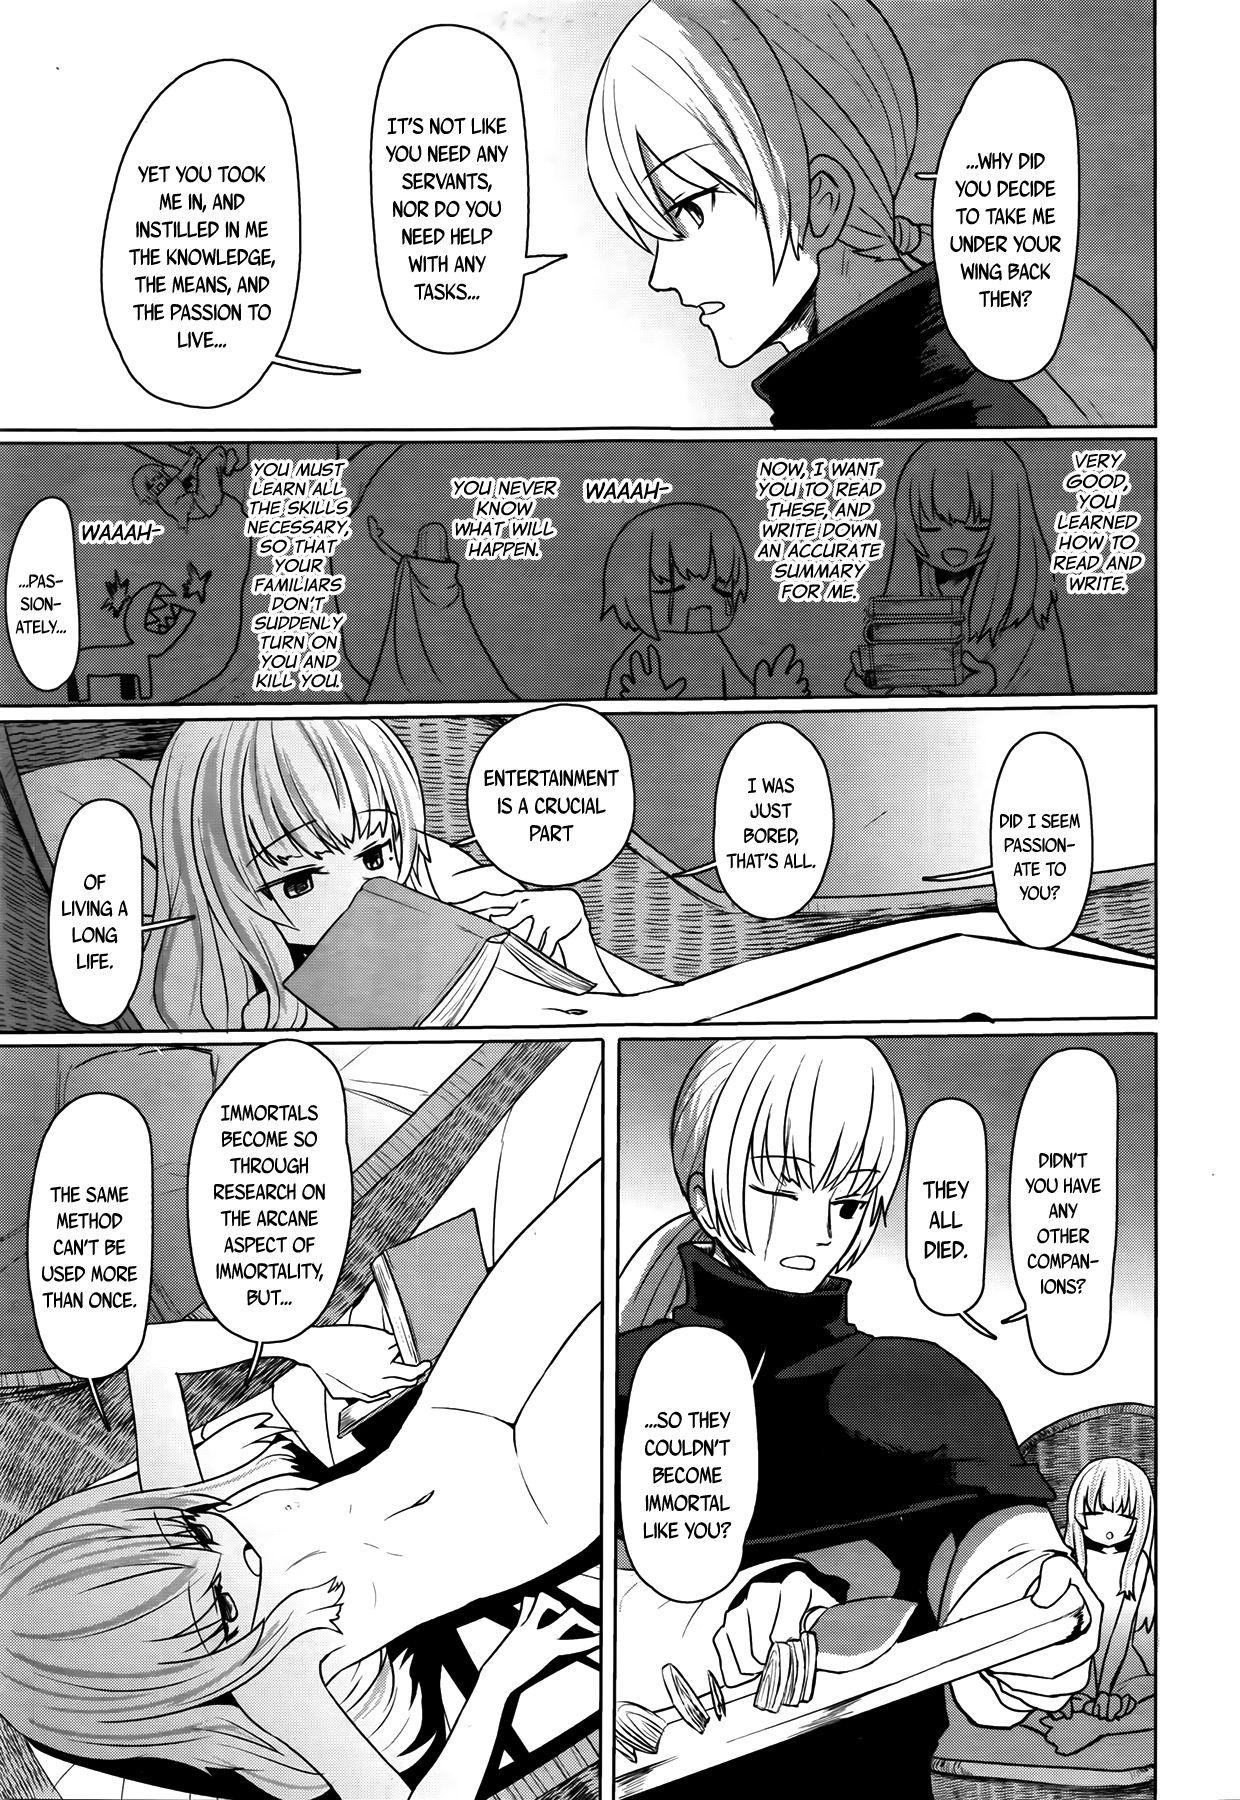 Swingers Anata no Sei desu yo - It's all your fault Family Roleplay - Page 9